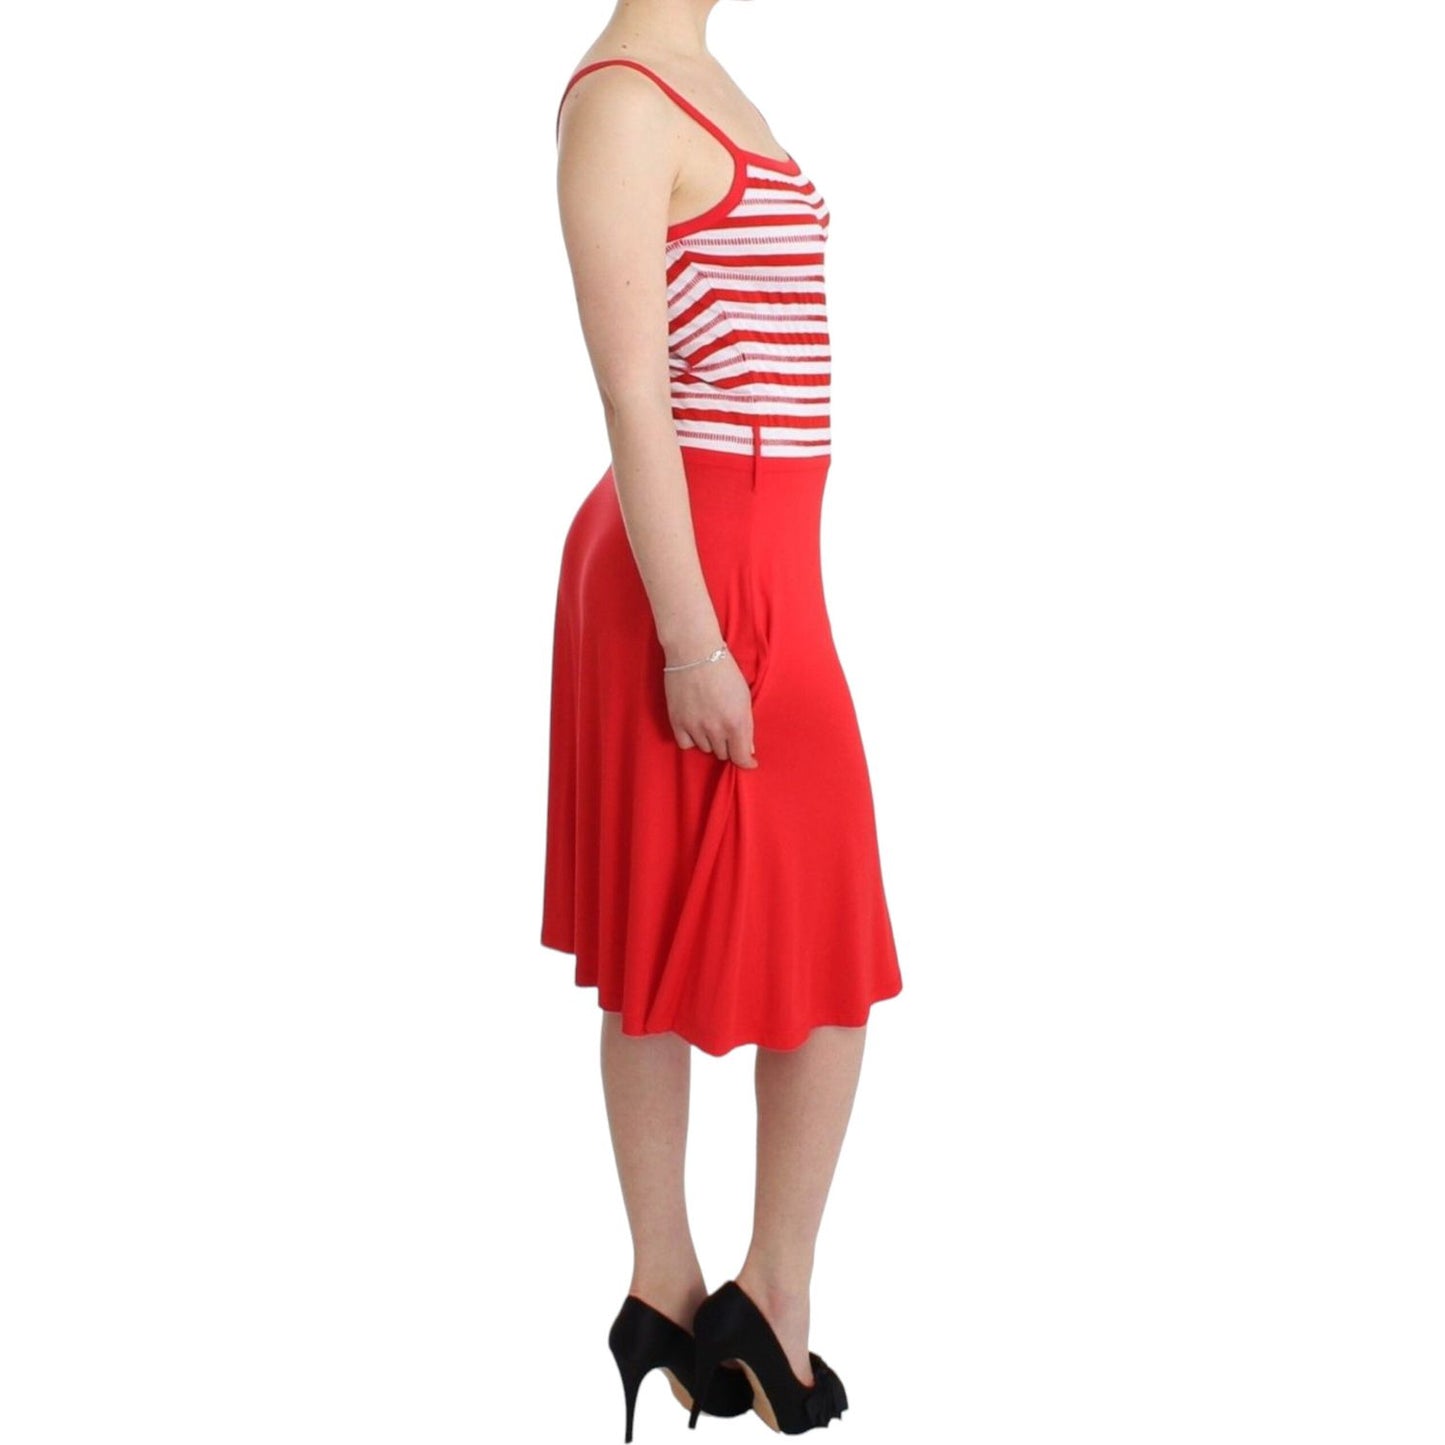 Roccobarocco Chic Audrey Jersey Line Knee-Length Dress red-striped-jersey-a-line-dress 2781-white-sheath-dress-31-scaled-191105ec-72c_3c3447b9-3db1-43d6-ab08-65d2aace8ea0.jpg